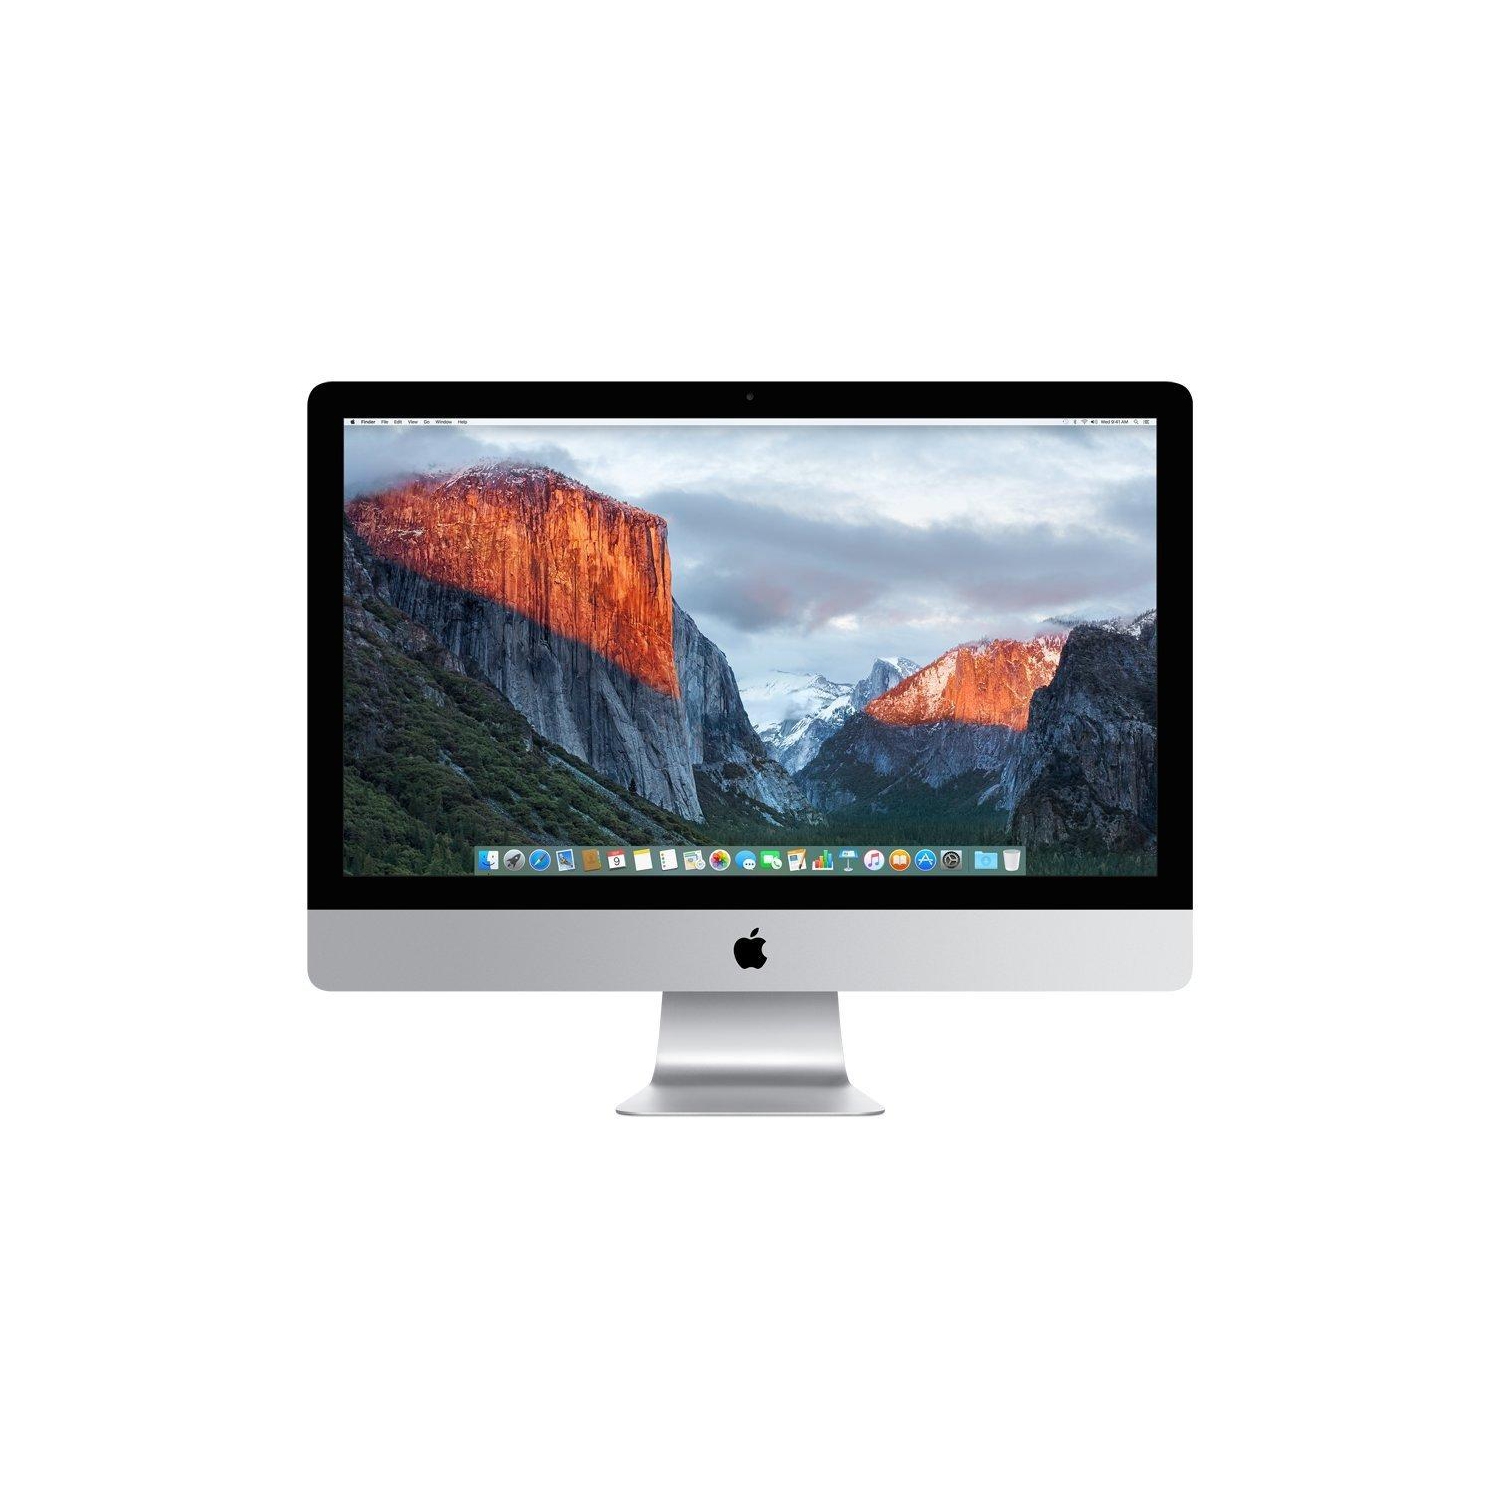 Refurbished (Good) - Apple iMac 21.5 Inch-Core i5-2.9GHZ- 8GB RAM - 1TB HDD - Late 2012- MD094LL/A - A1418(Grade A) with apple magic mouse